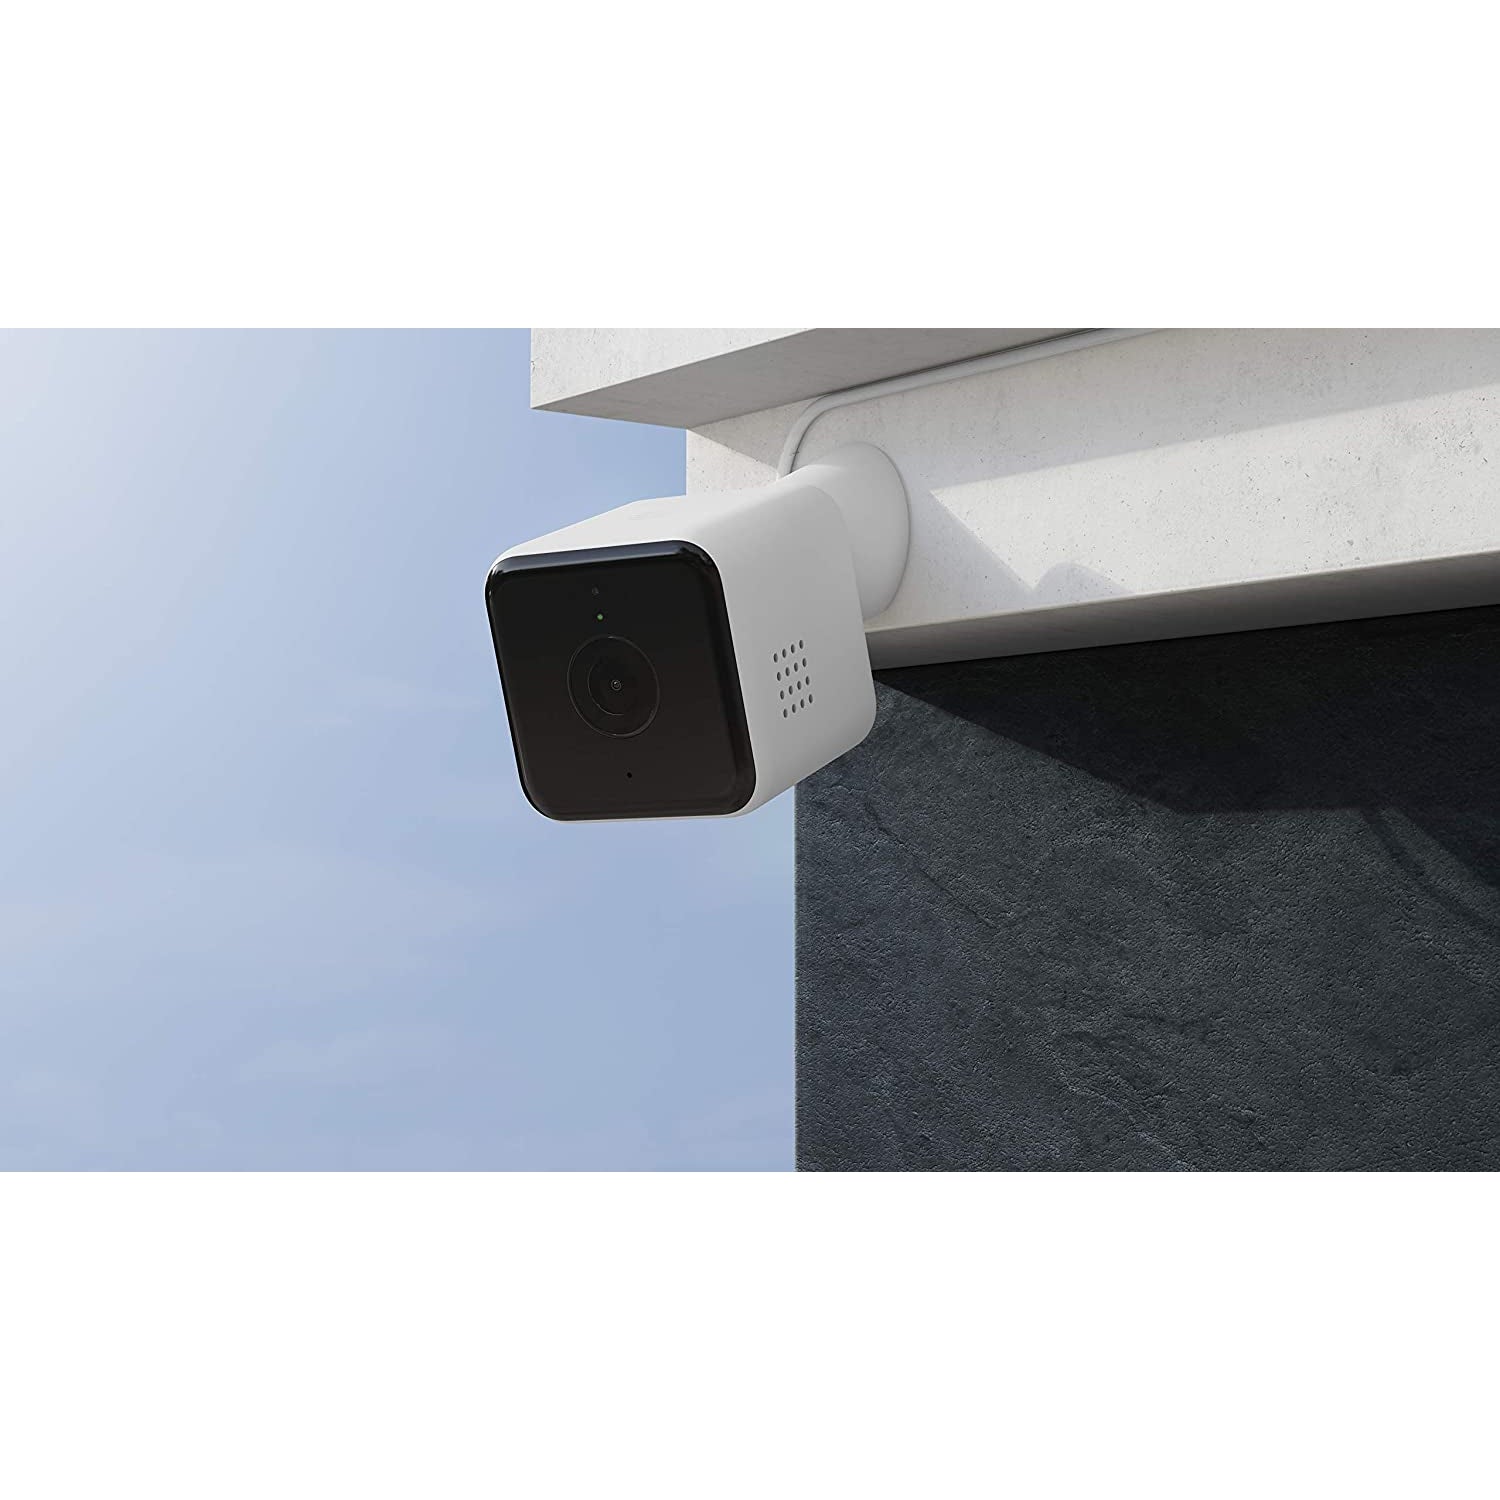 Hive View Outdoor Security Camera, White